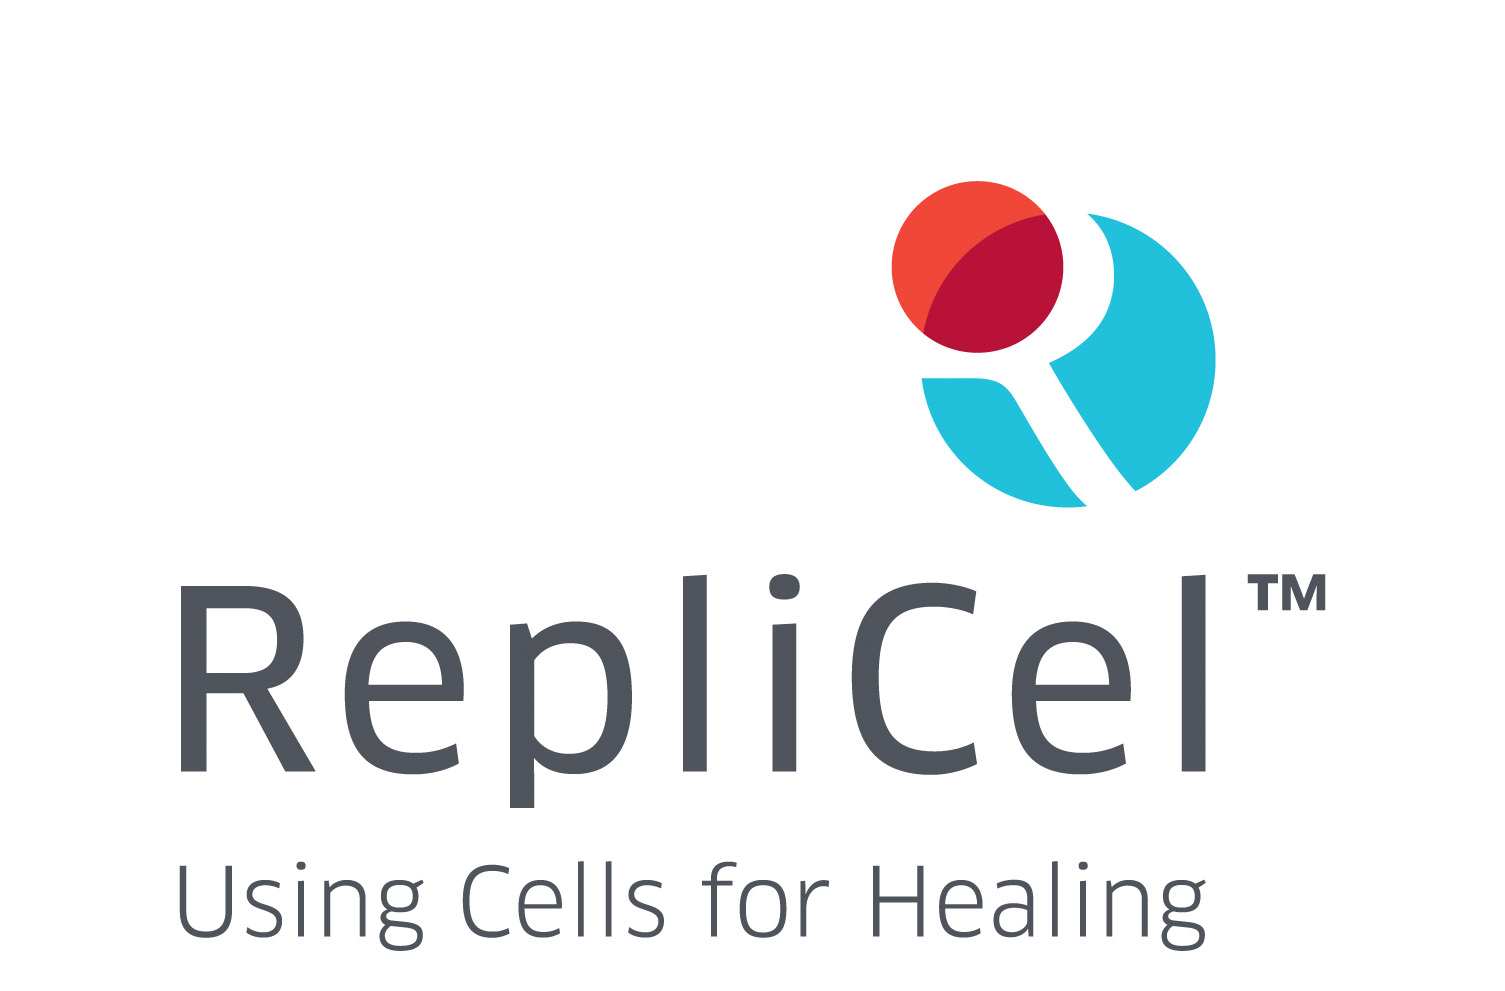 RepliCel Life Sciences, Inc., Wednesday, July 7, 2021, Press release picture